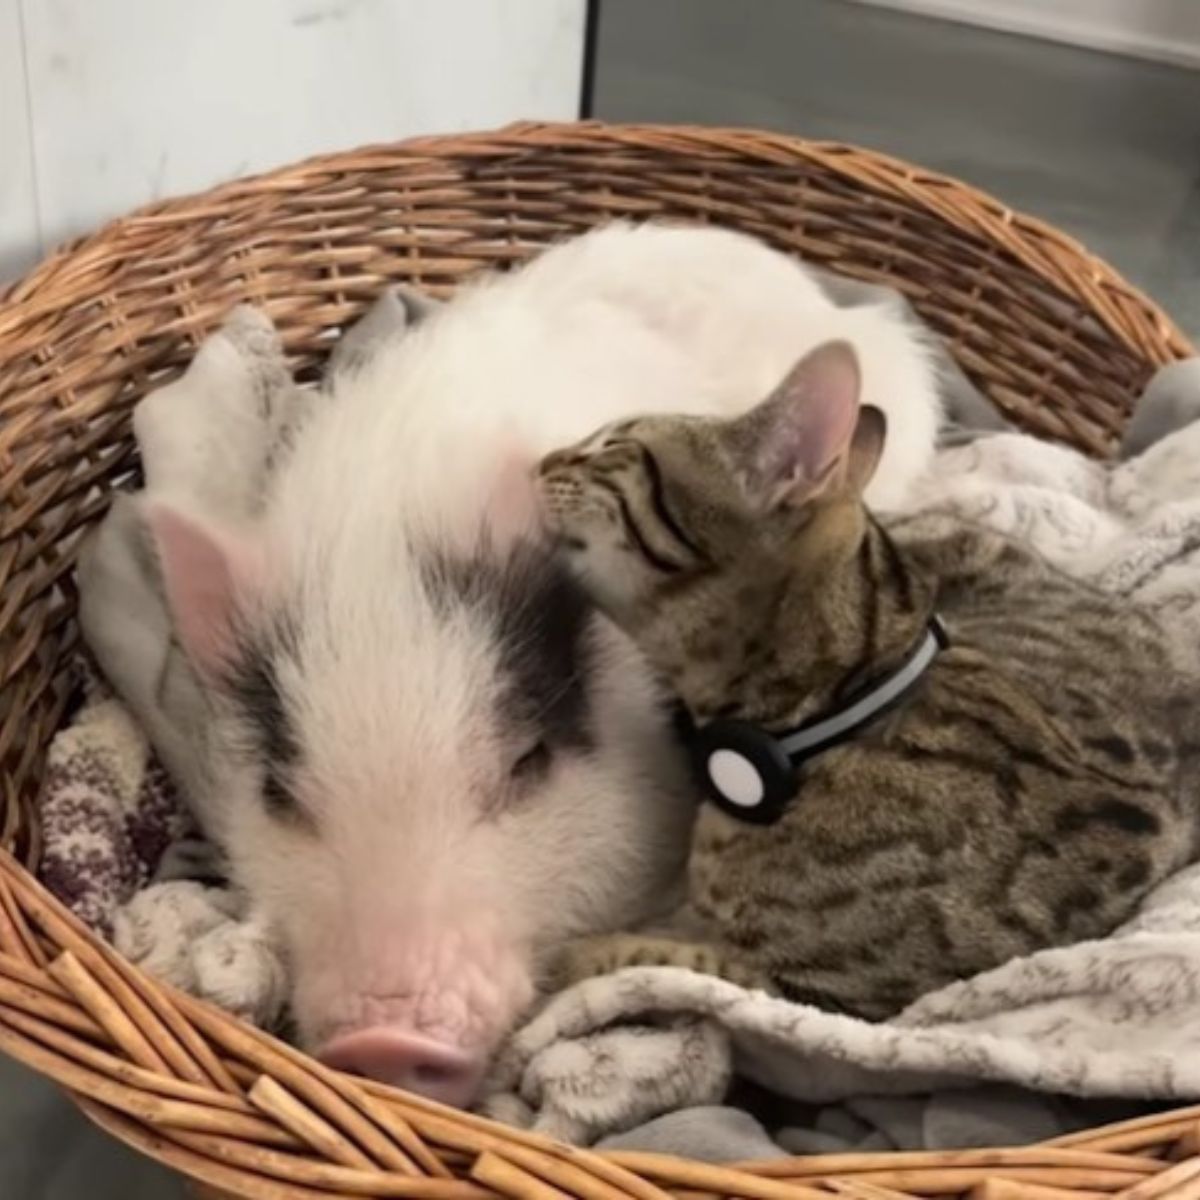 photo of kitten and piglet lying in wooden basket